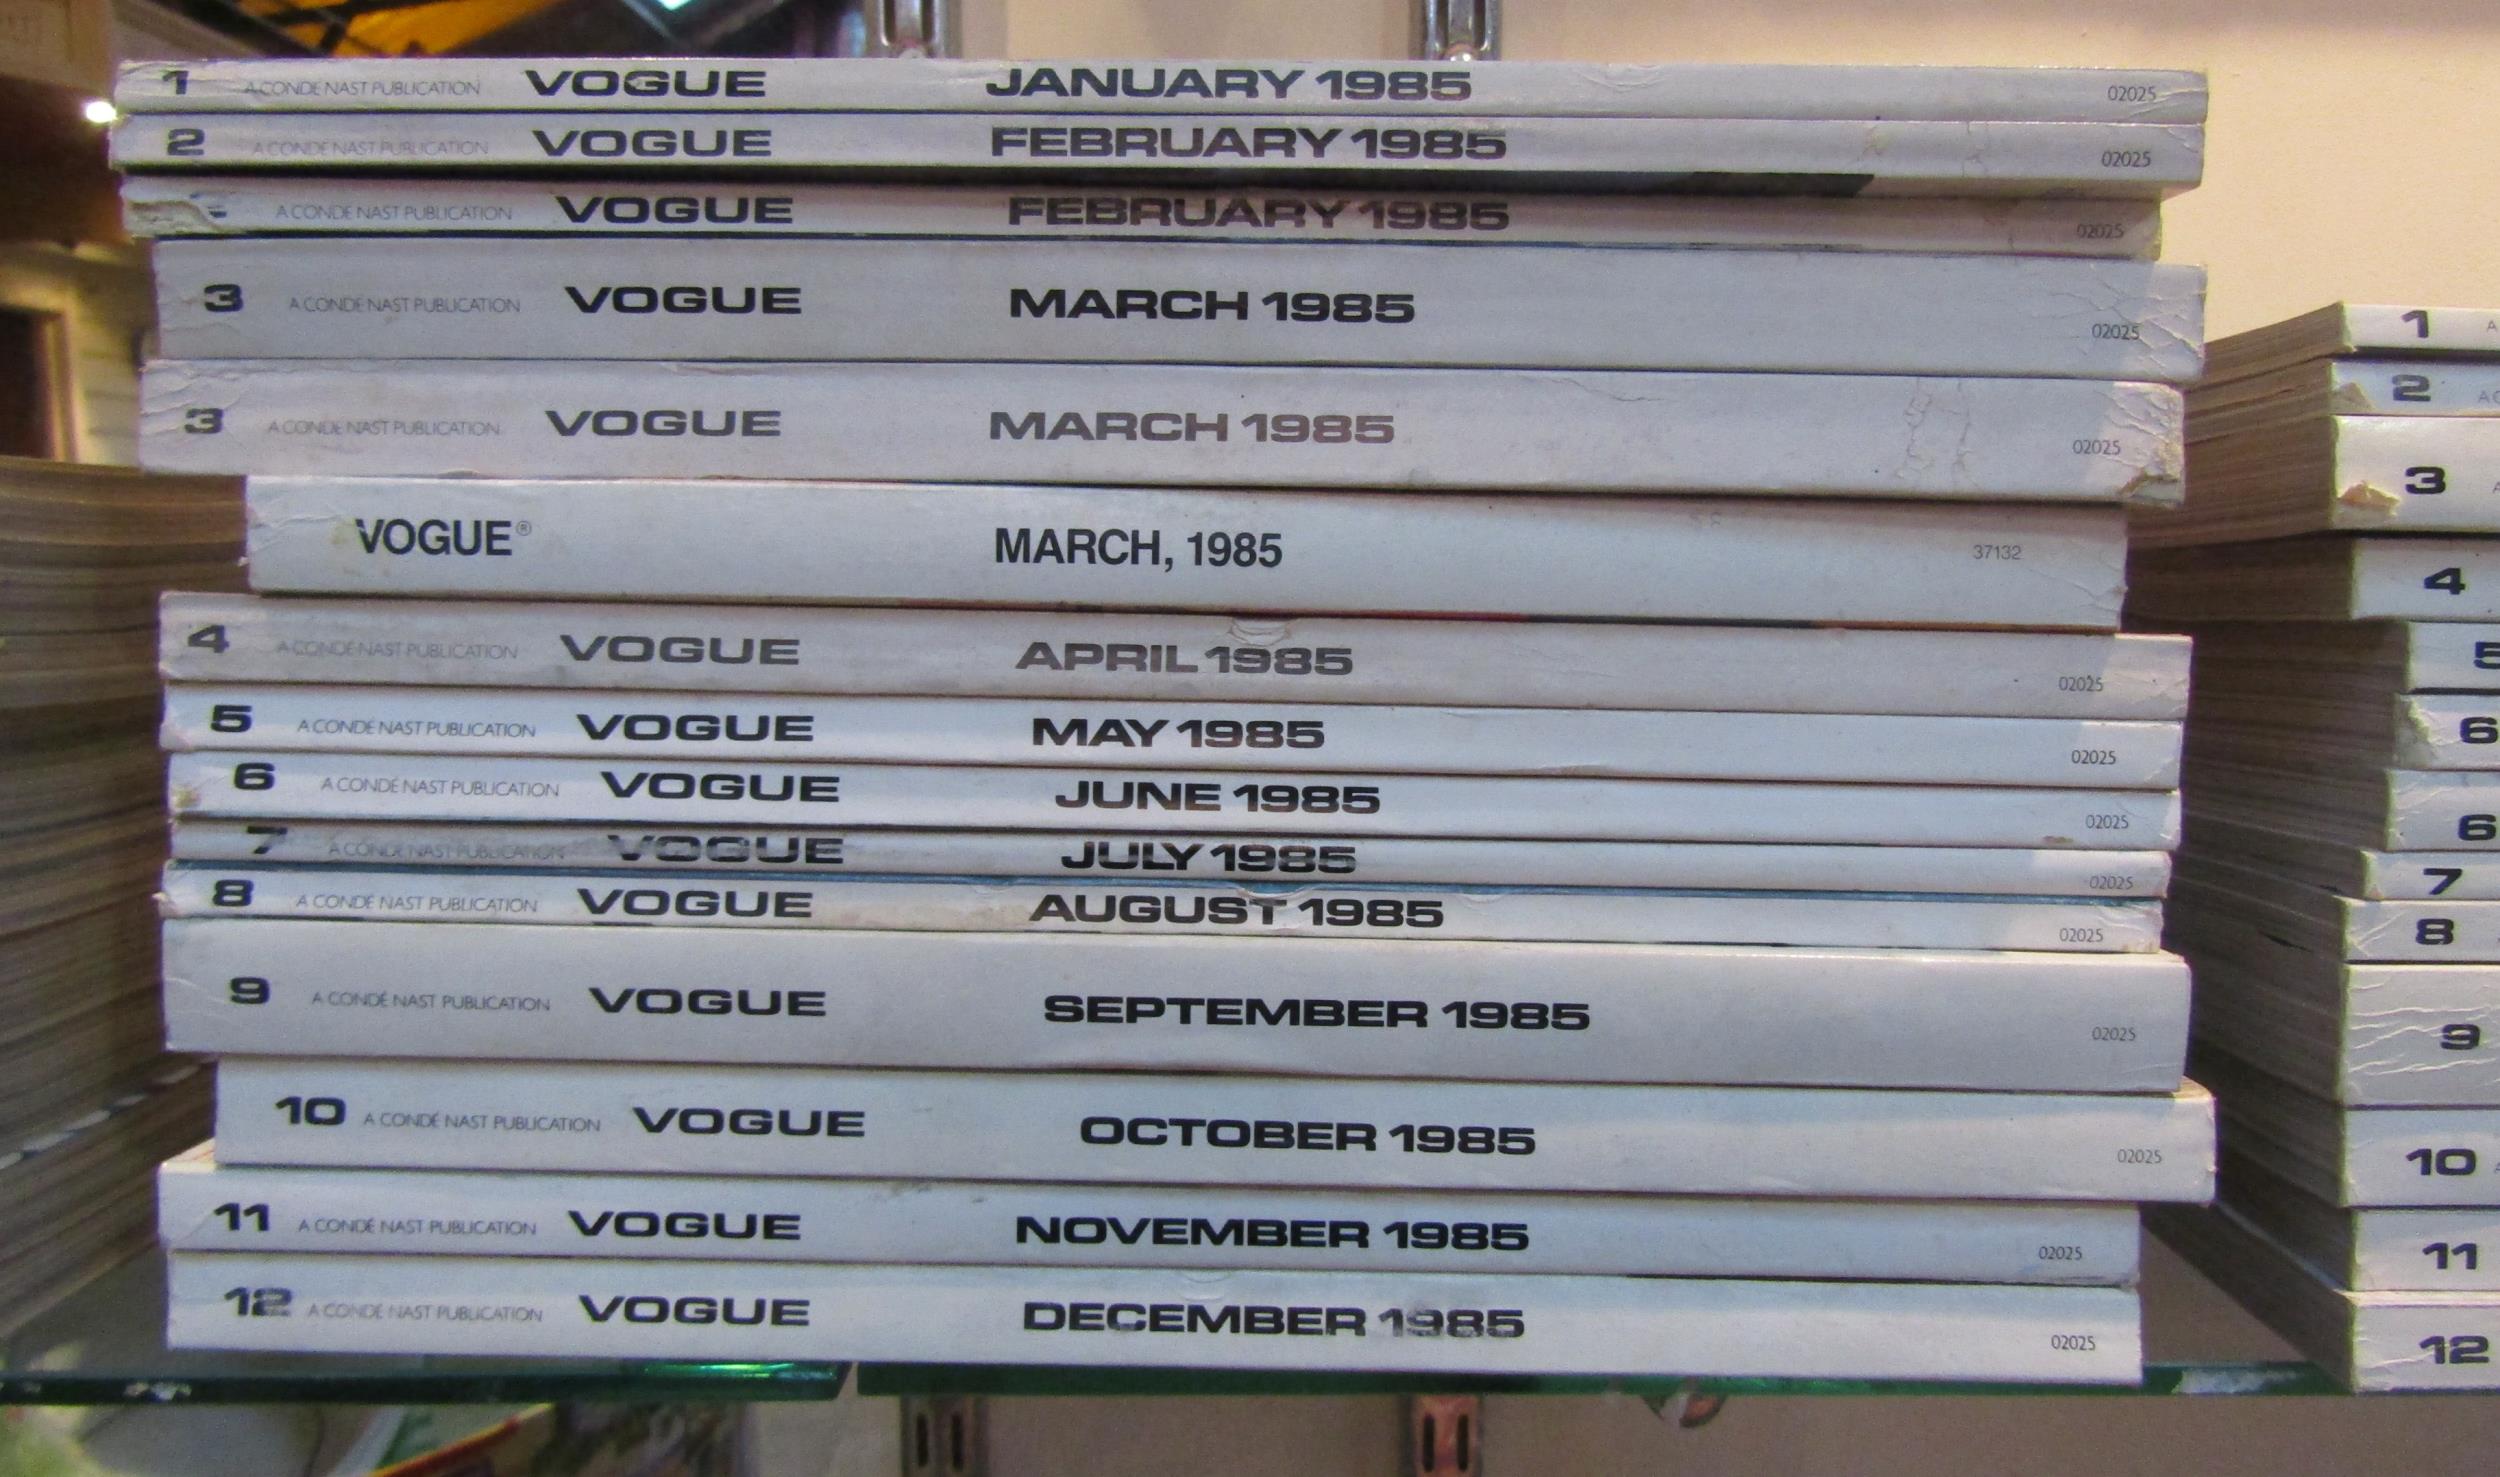 British Vogue magazine 1980 - January (1), February (2), March 1st (3), March 15th (4), April 1st ( - Image 14 of 40